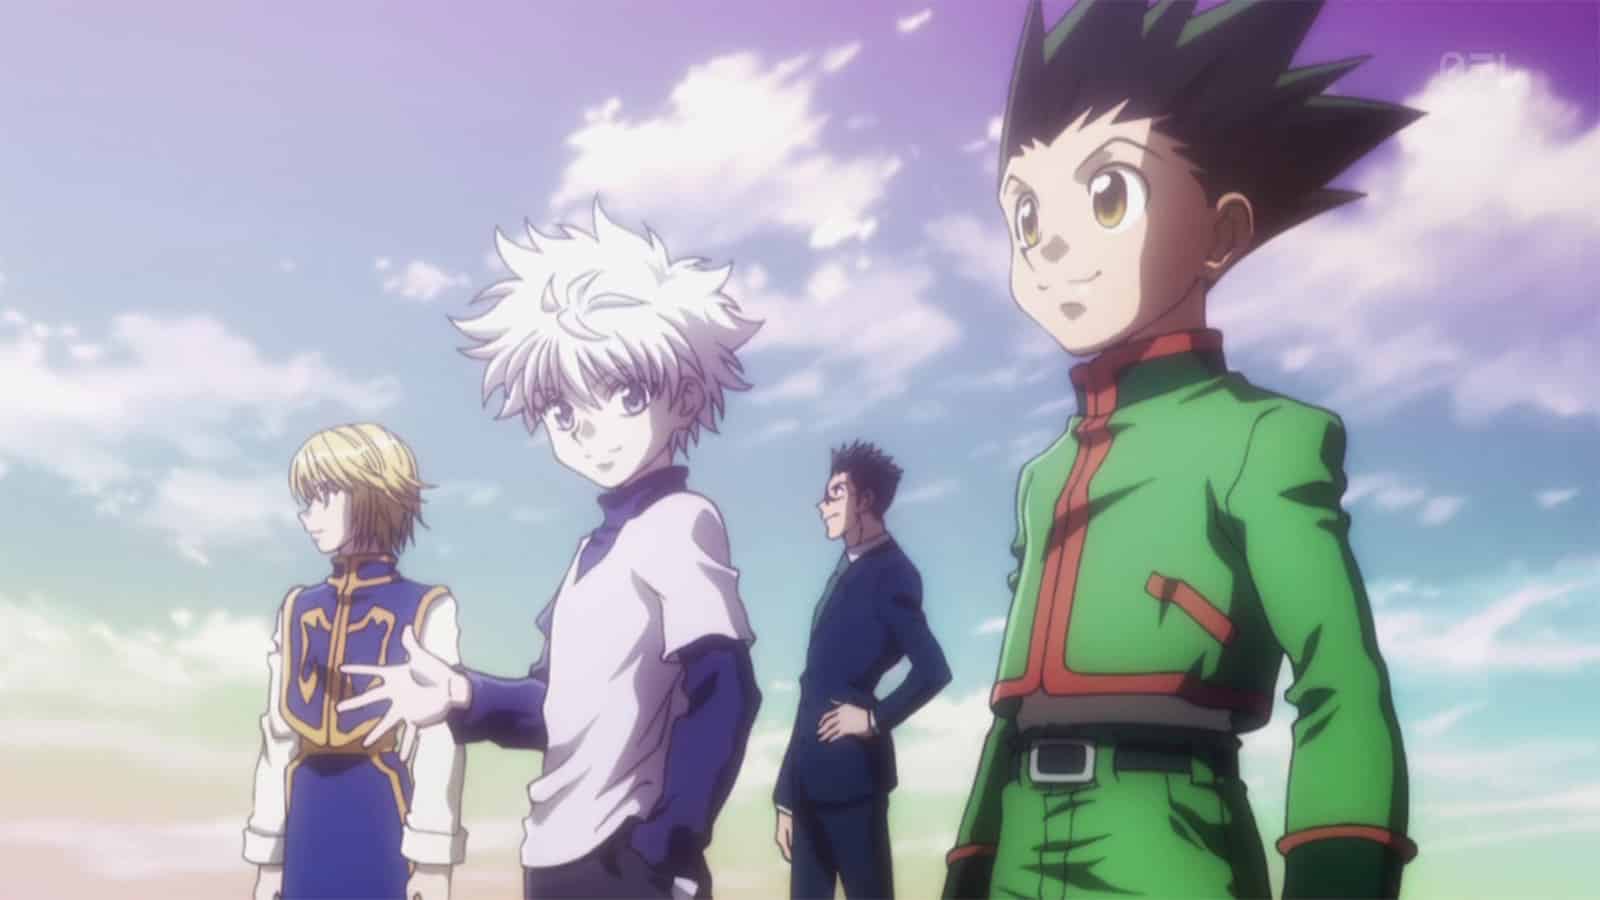 Hunter x Hunter Is Coming Back, Confirmed By One Punch Man Creator